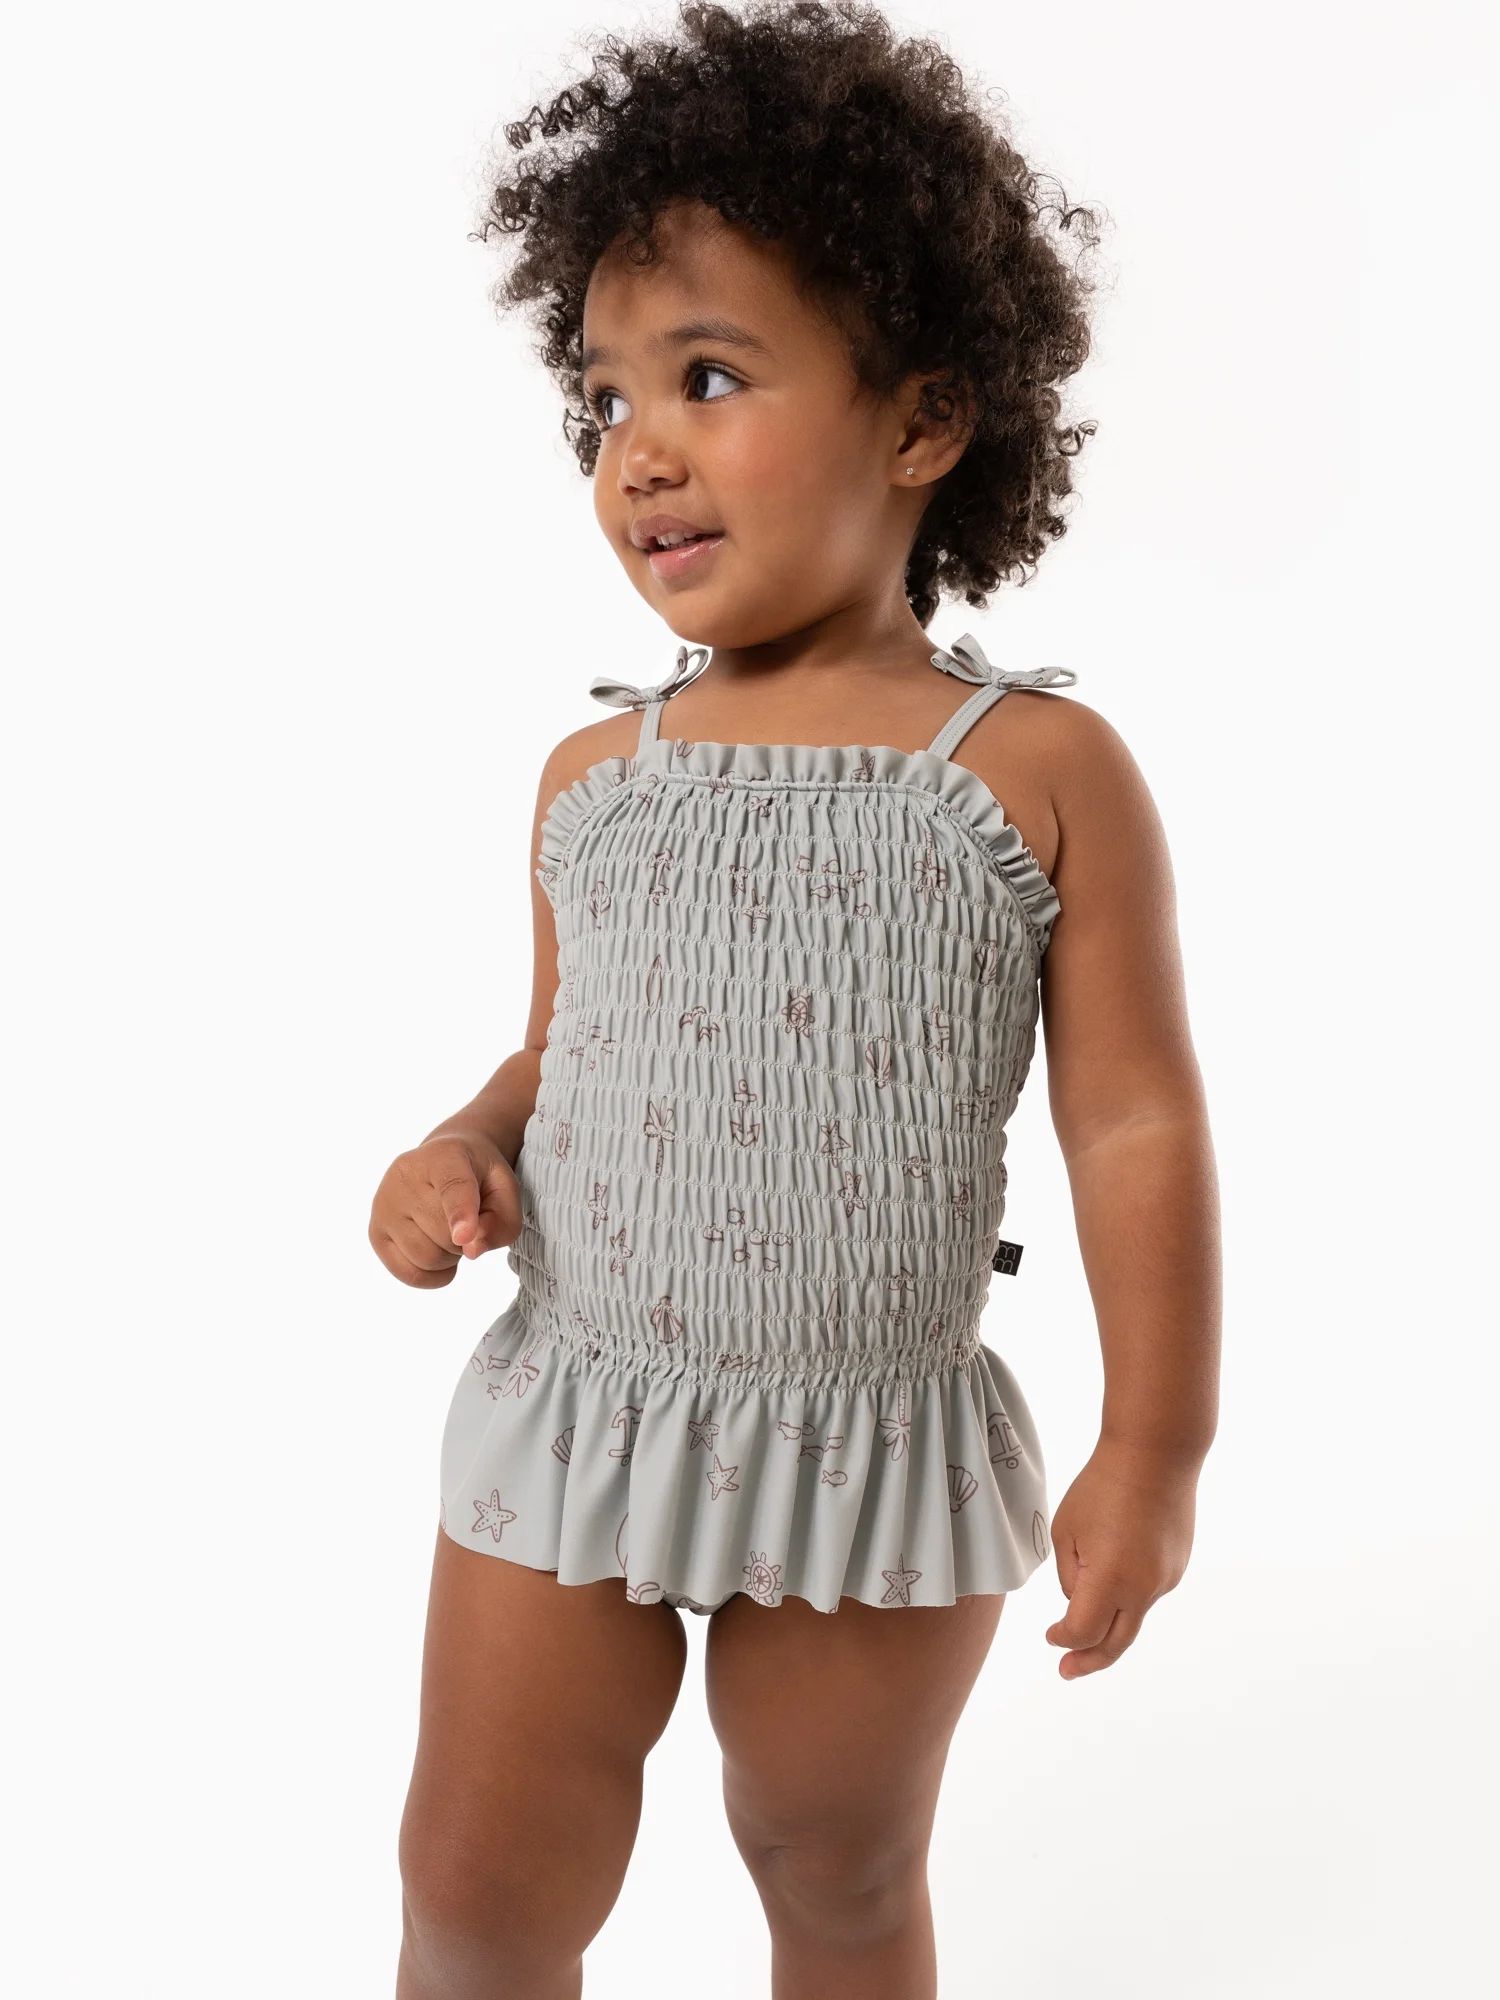 Modern Moments by Gerber Baby and Toddler Girl Smocked Swimsuit, Sizes 12M- 5T | Walmart (US)